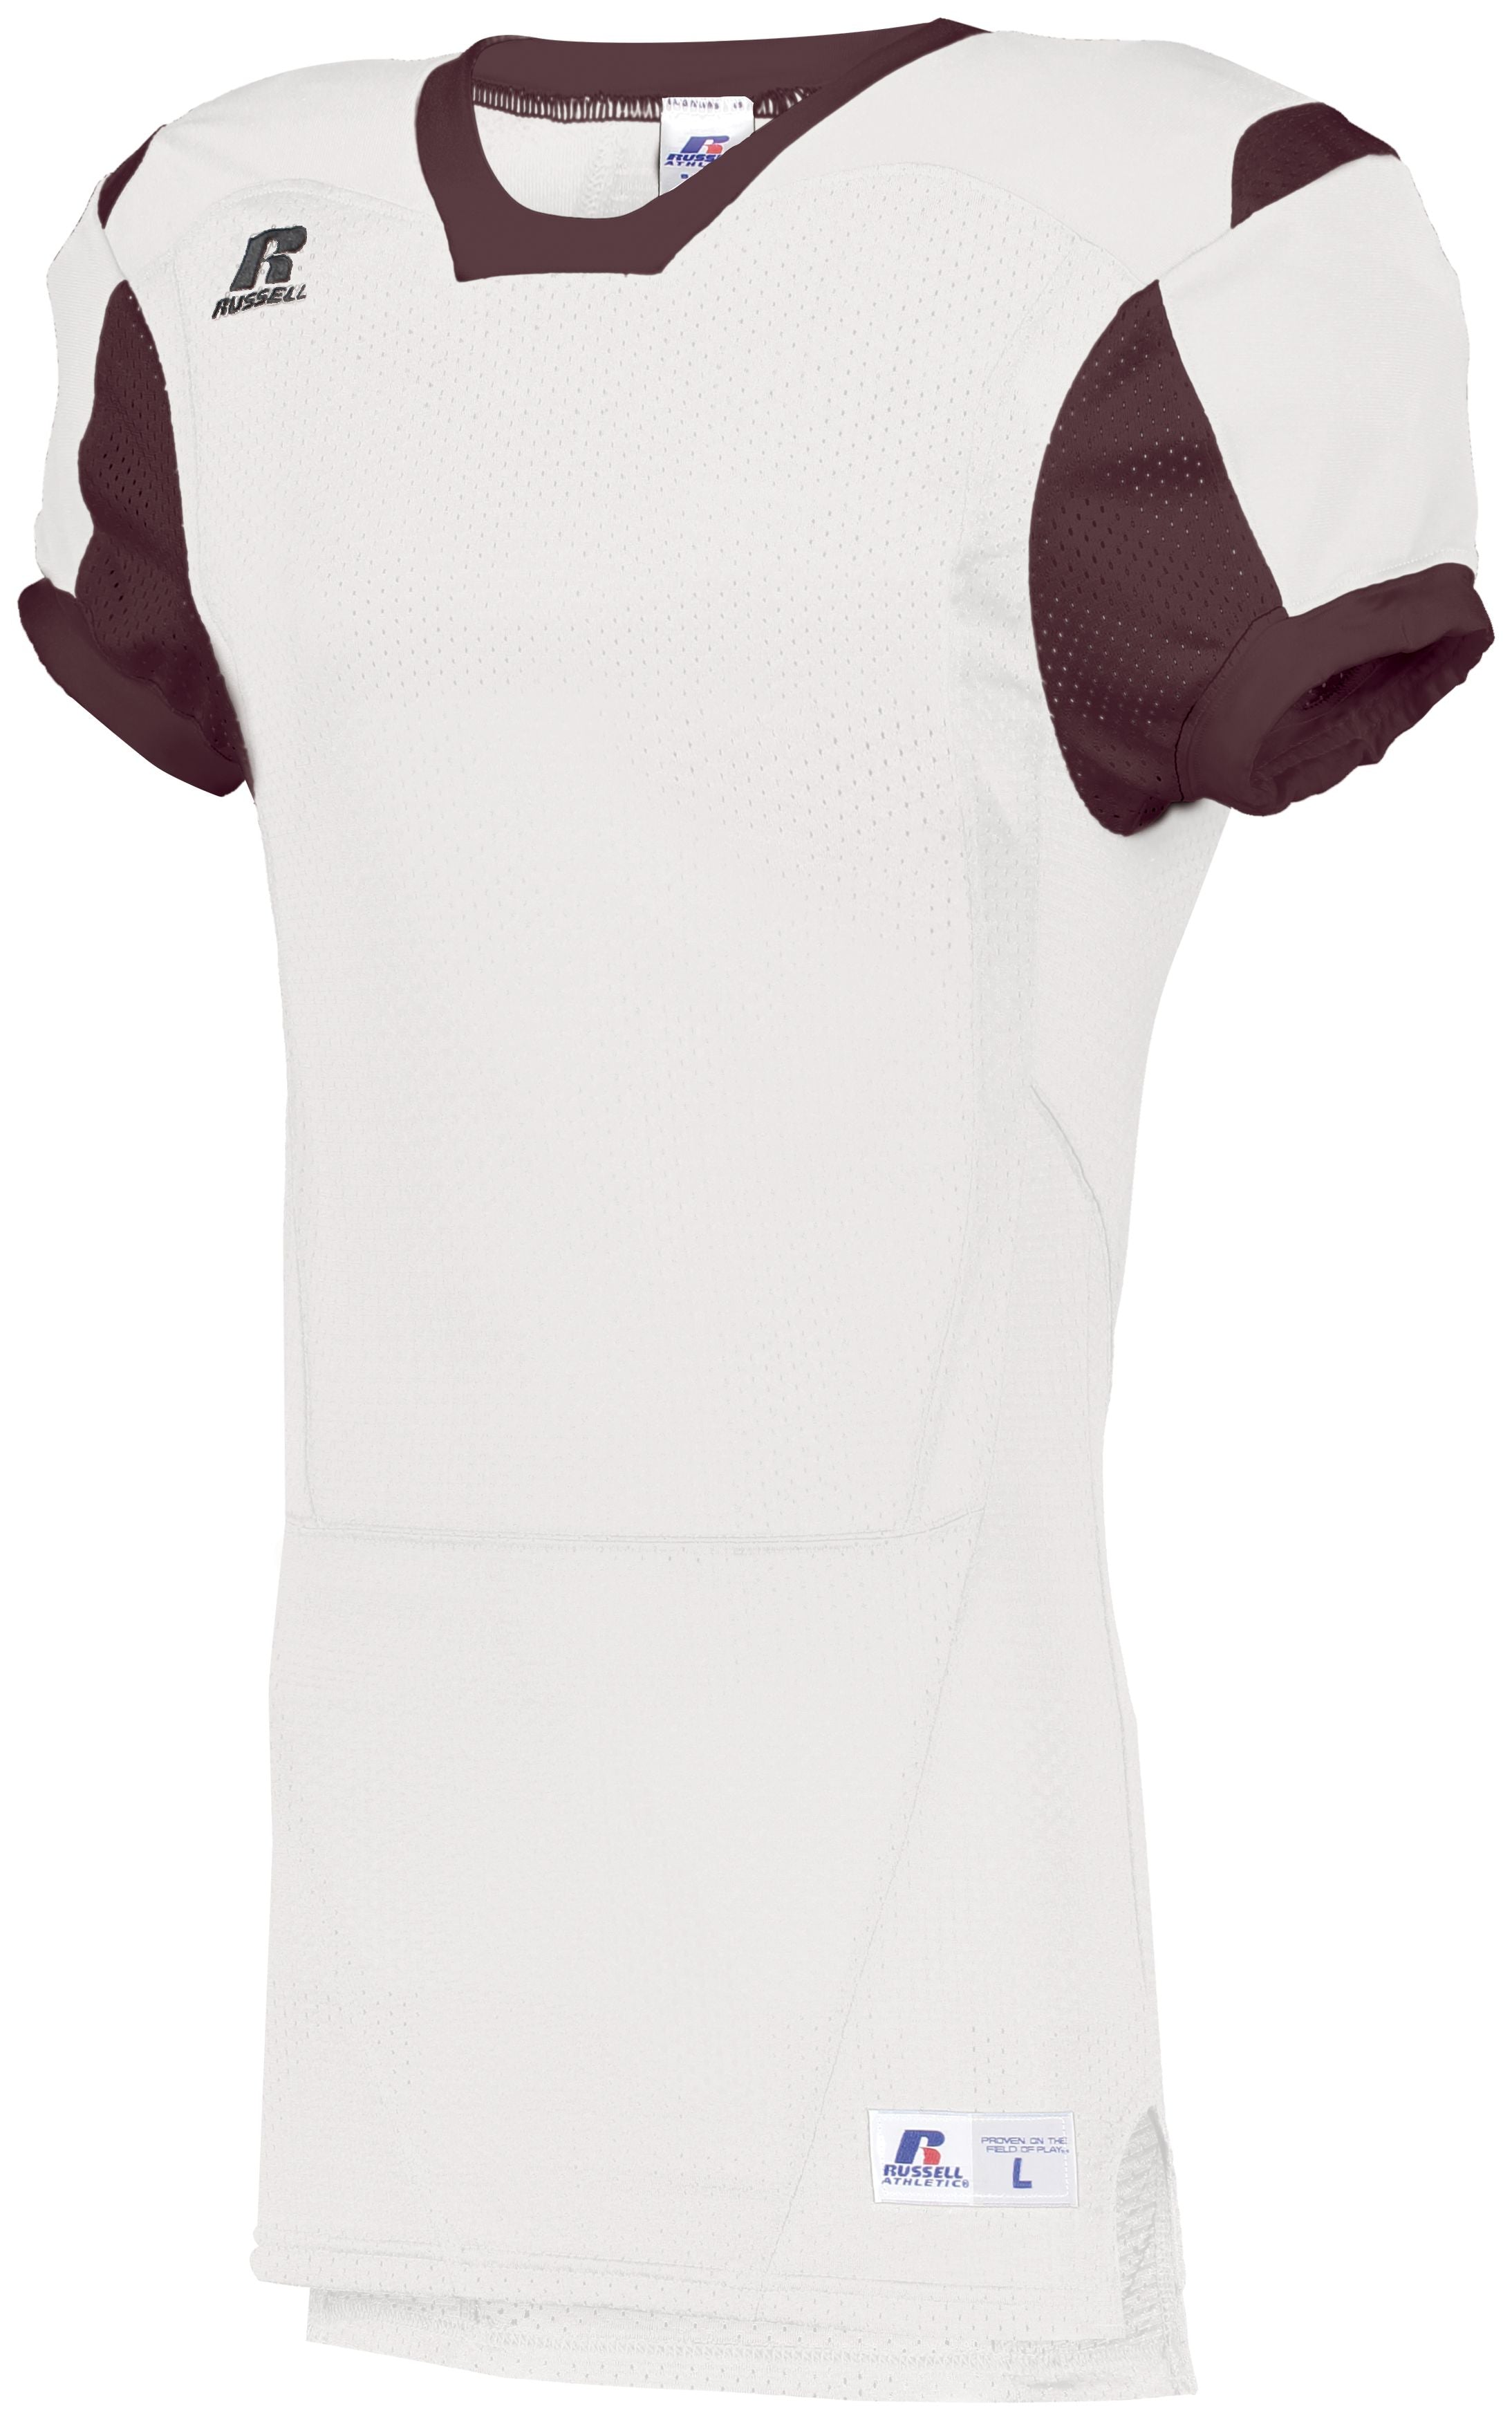 Russell Athletic Color Block Game Jersey in White/Maroon  -Part of the Adult, Adult-Jersey, Football, Russell-Athletic-Products, Shirts, All-Sports, All-Sports-1 product lines at KanaleyCreations.com